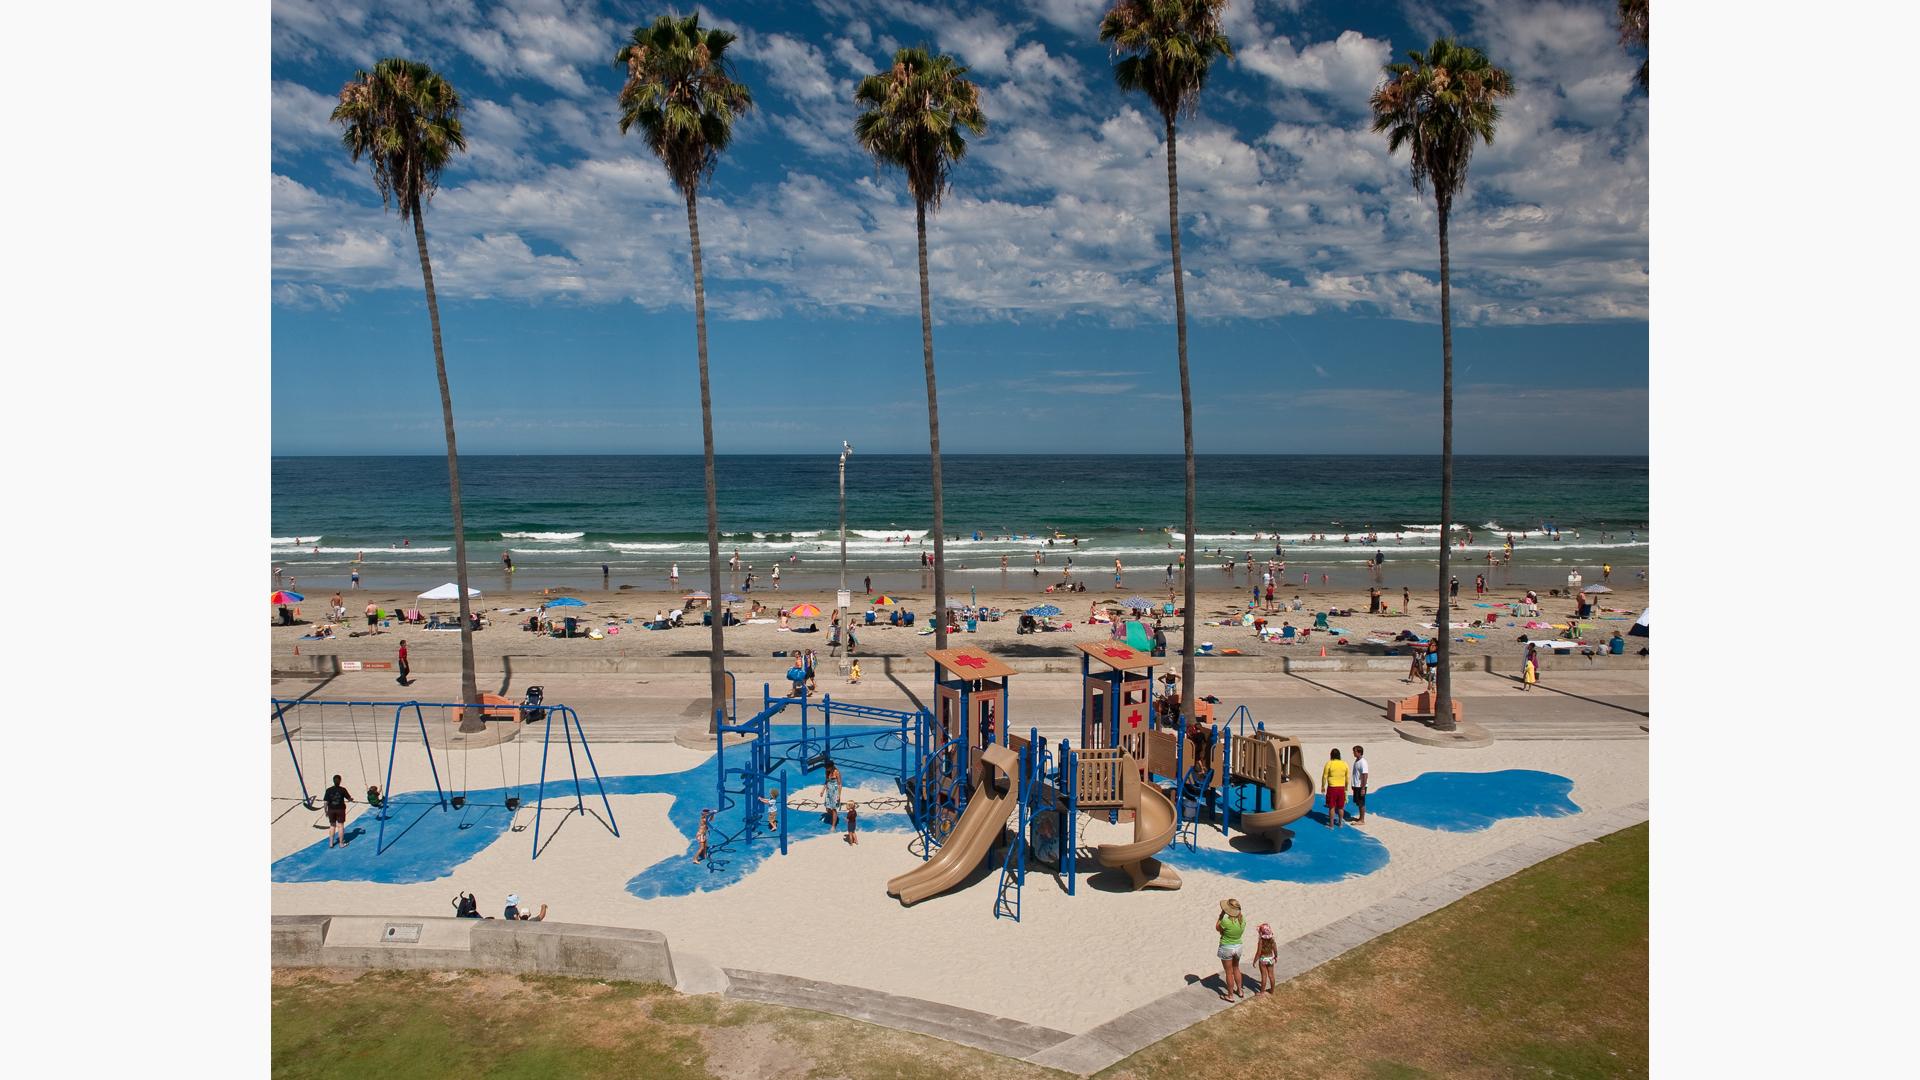 Kellogg Park in La Jolla, CA. A beach-themed PlayBooster® playstructure for ages 5 to 12. Playground features Custom play panels and signage against the background of the pacific ocean.